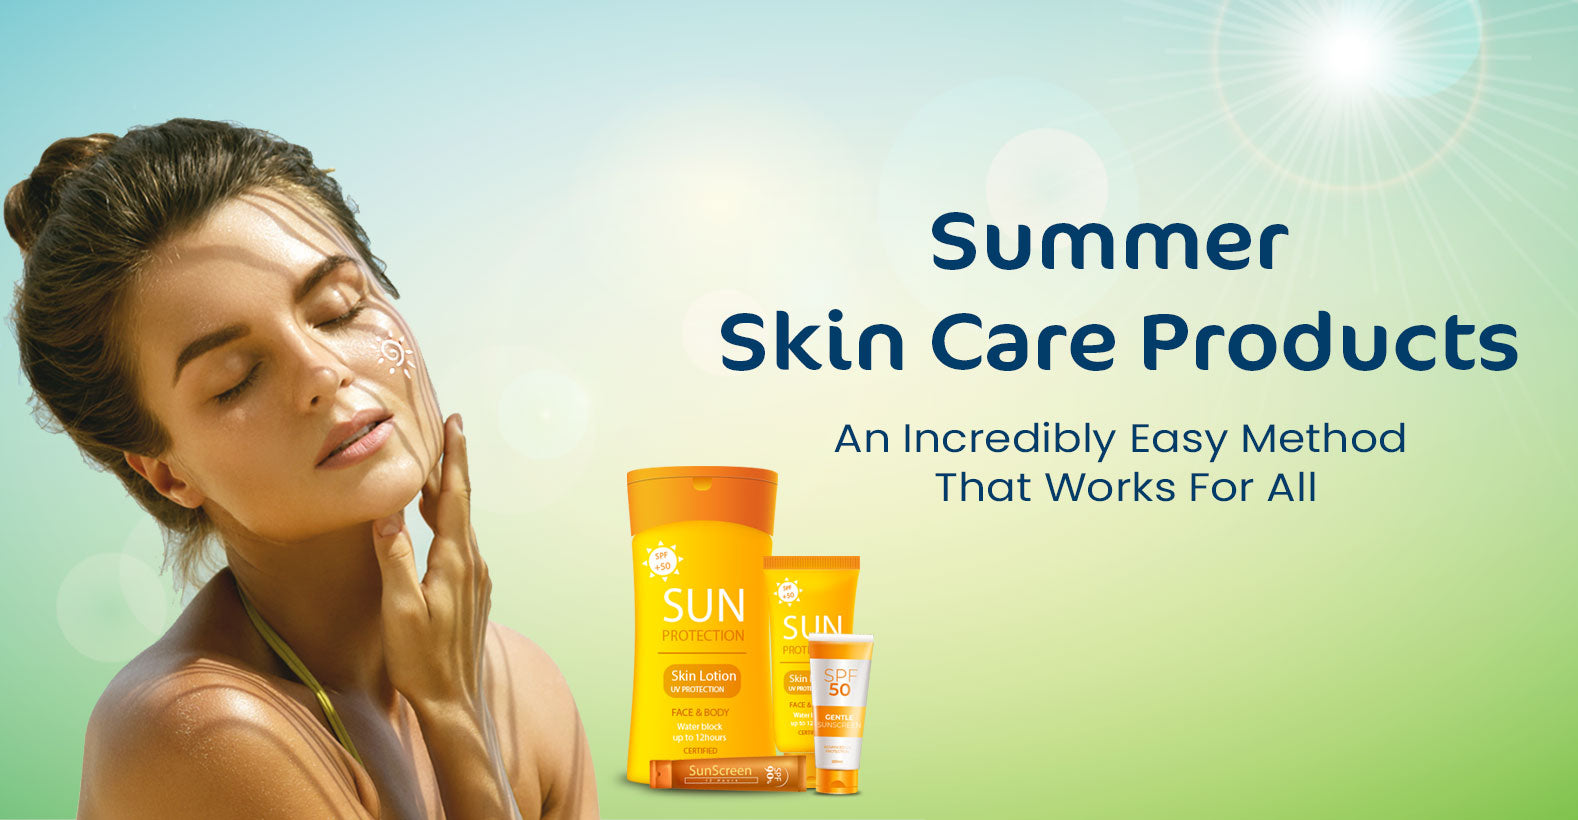 Summer SkinCare Tips With Skin Care Products